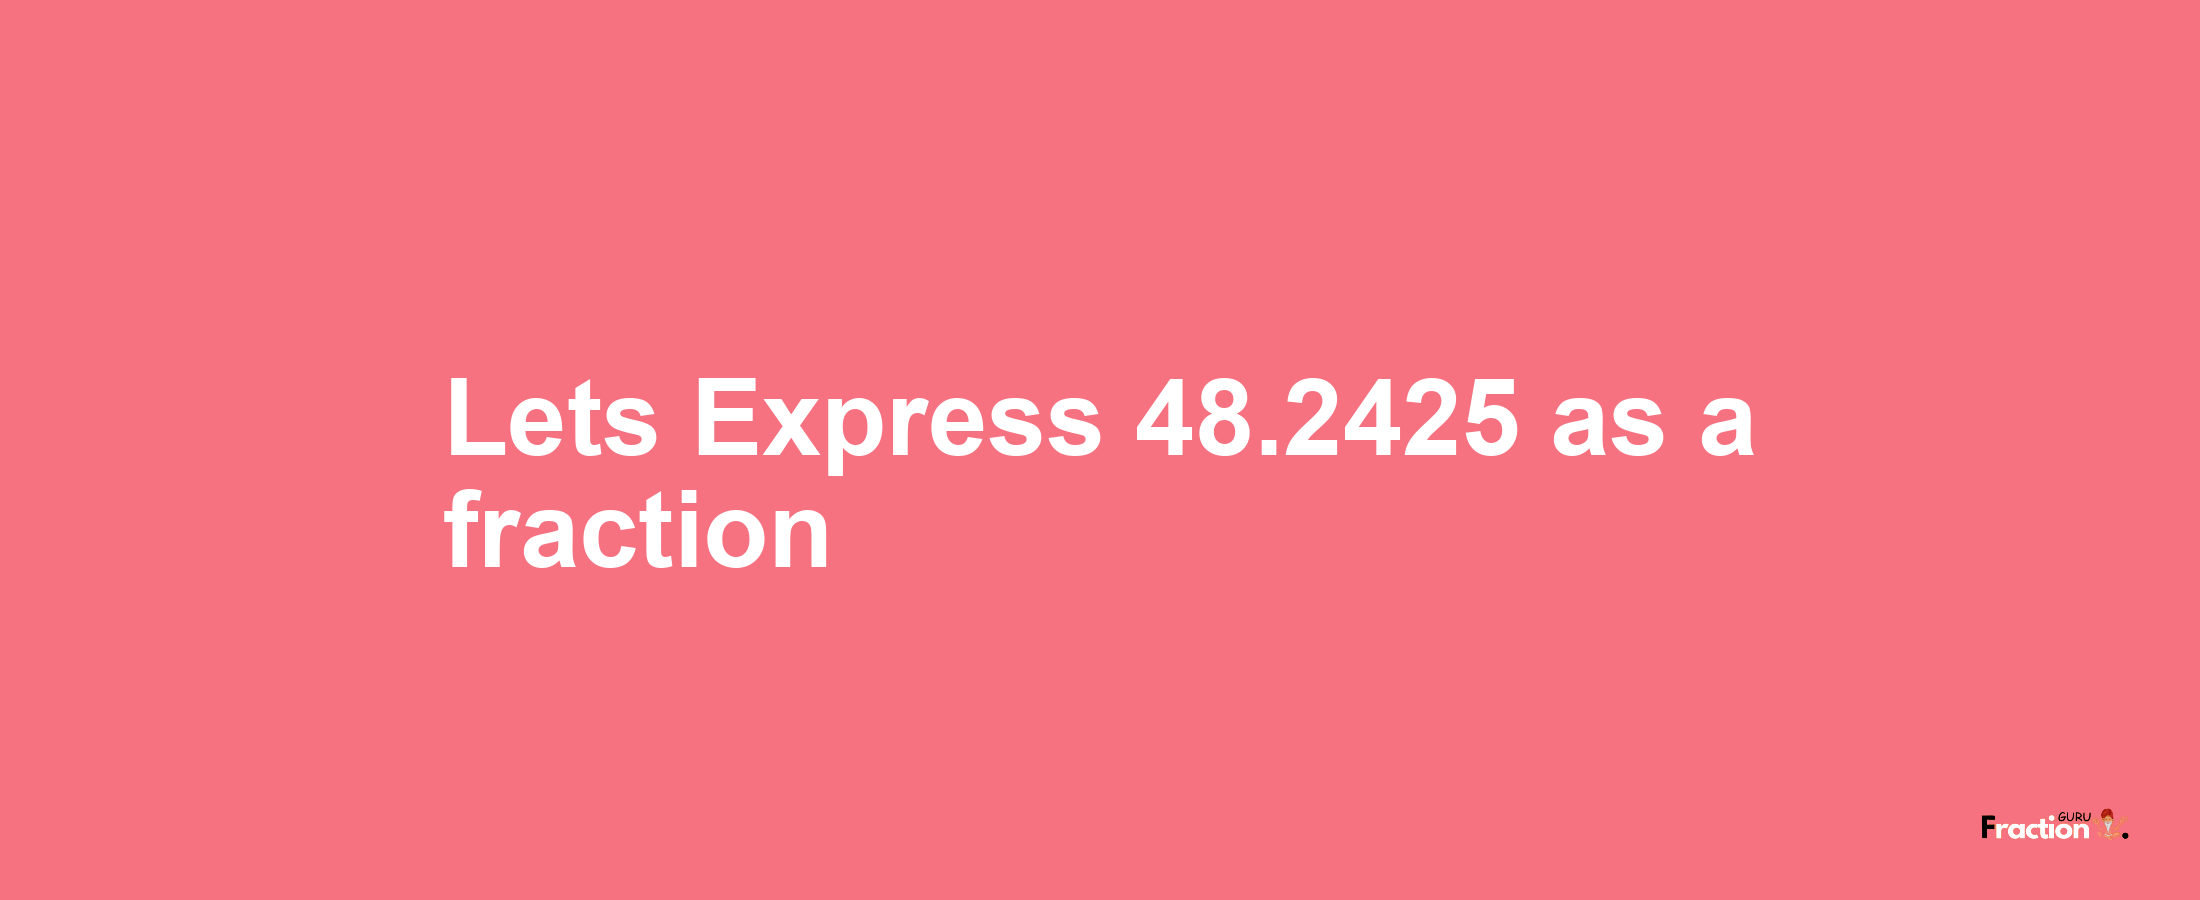 Lets Express 48.2425 as afraction